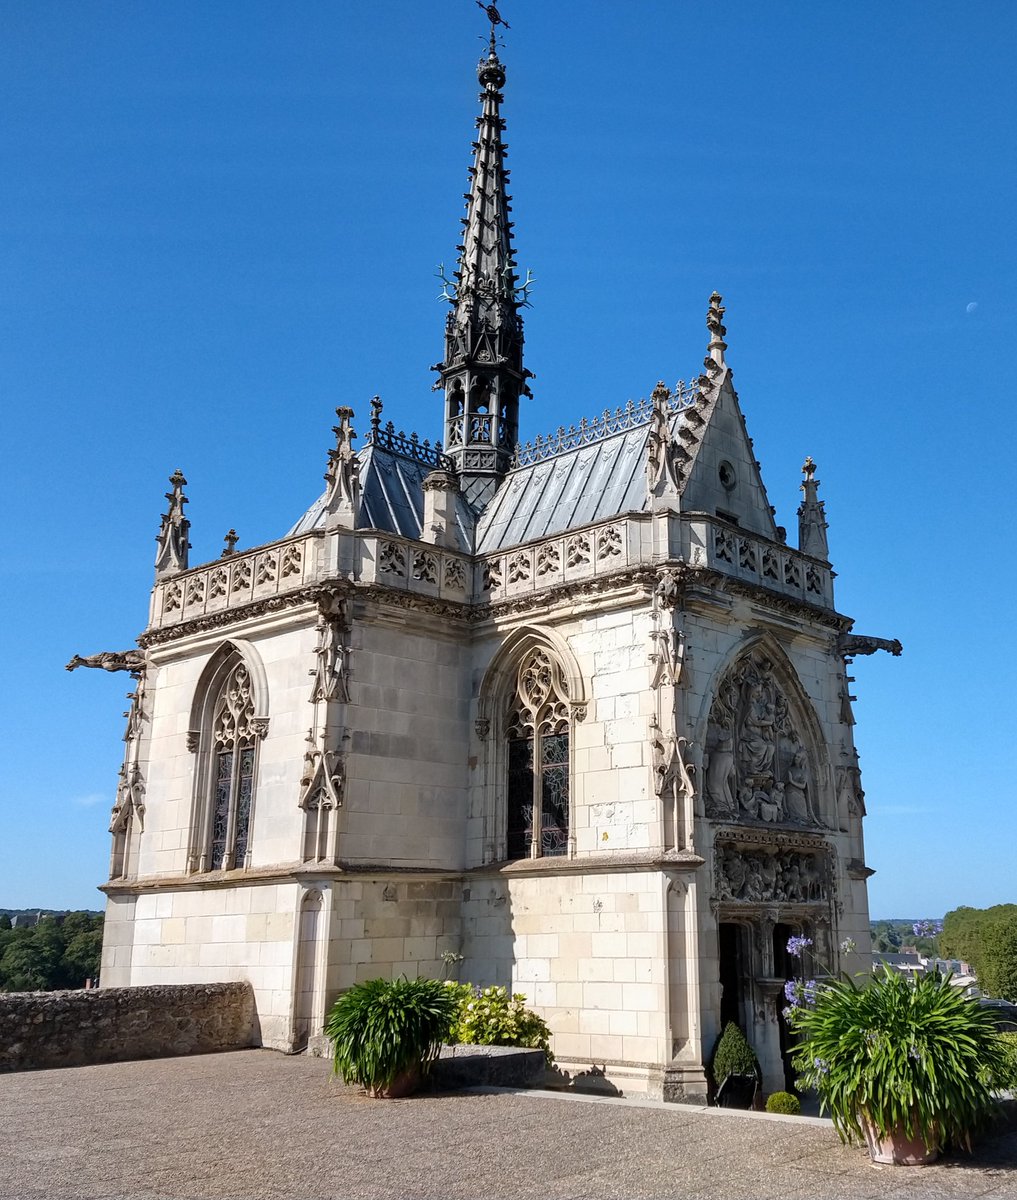 The chapel in Amboise 🇨🇵, that contains the grave of Leonardo da Vinci. (📷 my own)